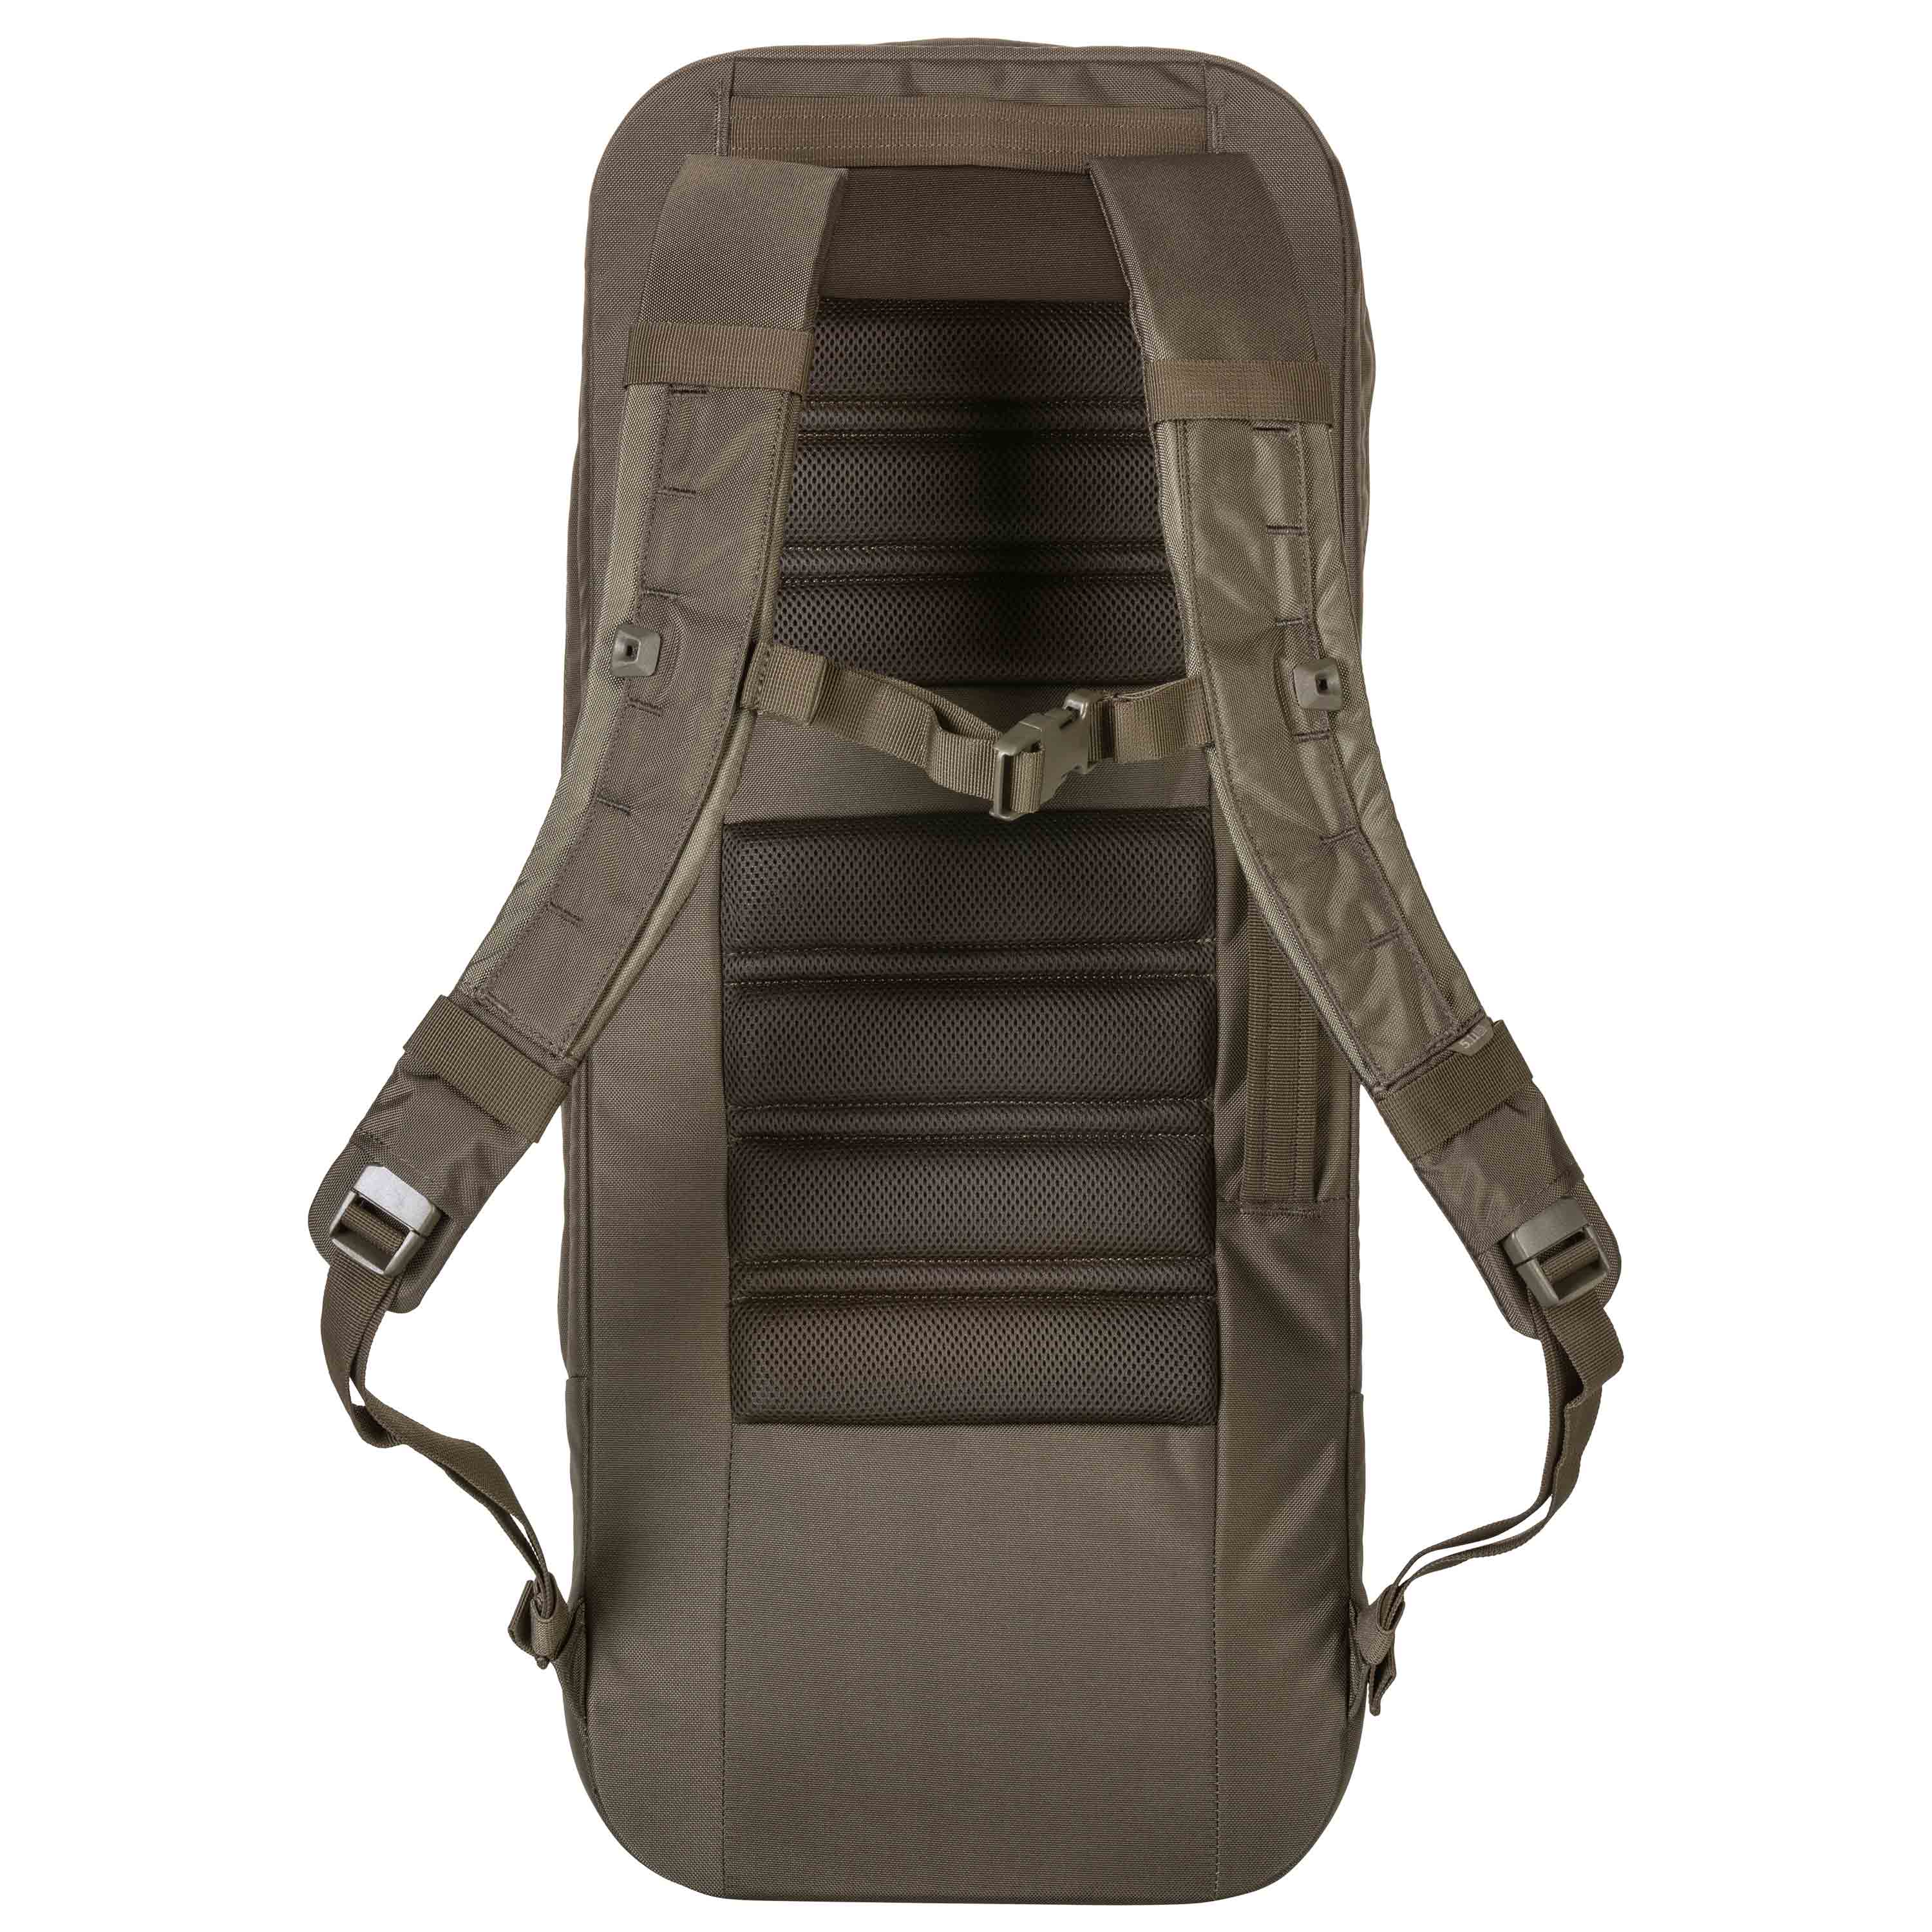 Purchase the 5.11 Rifle-Backpack LV M4 Shorty tarmac by ASMC